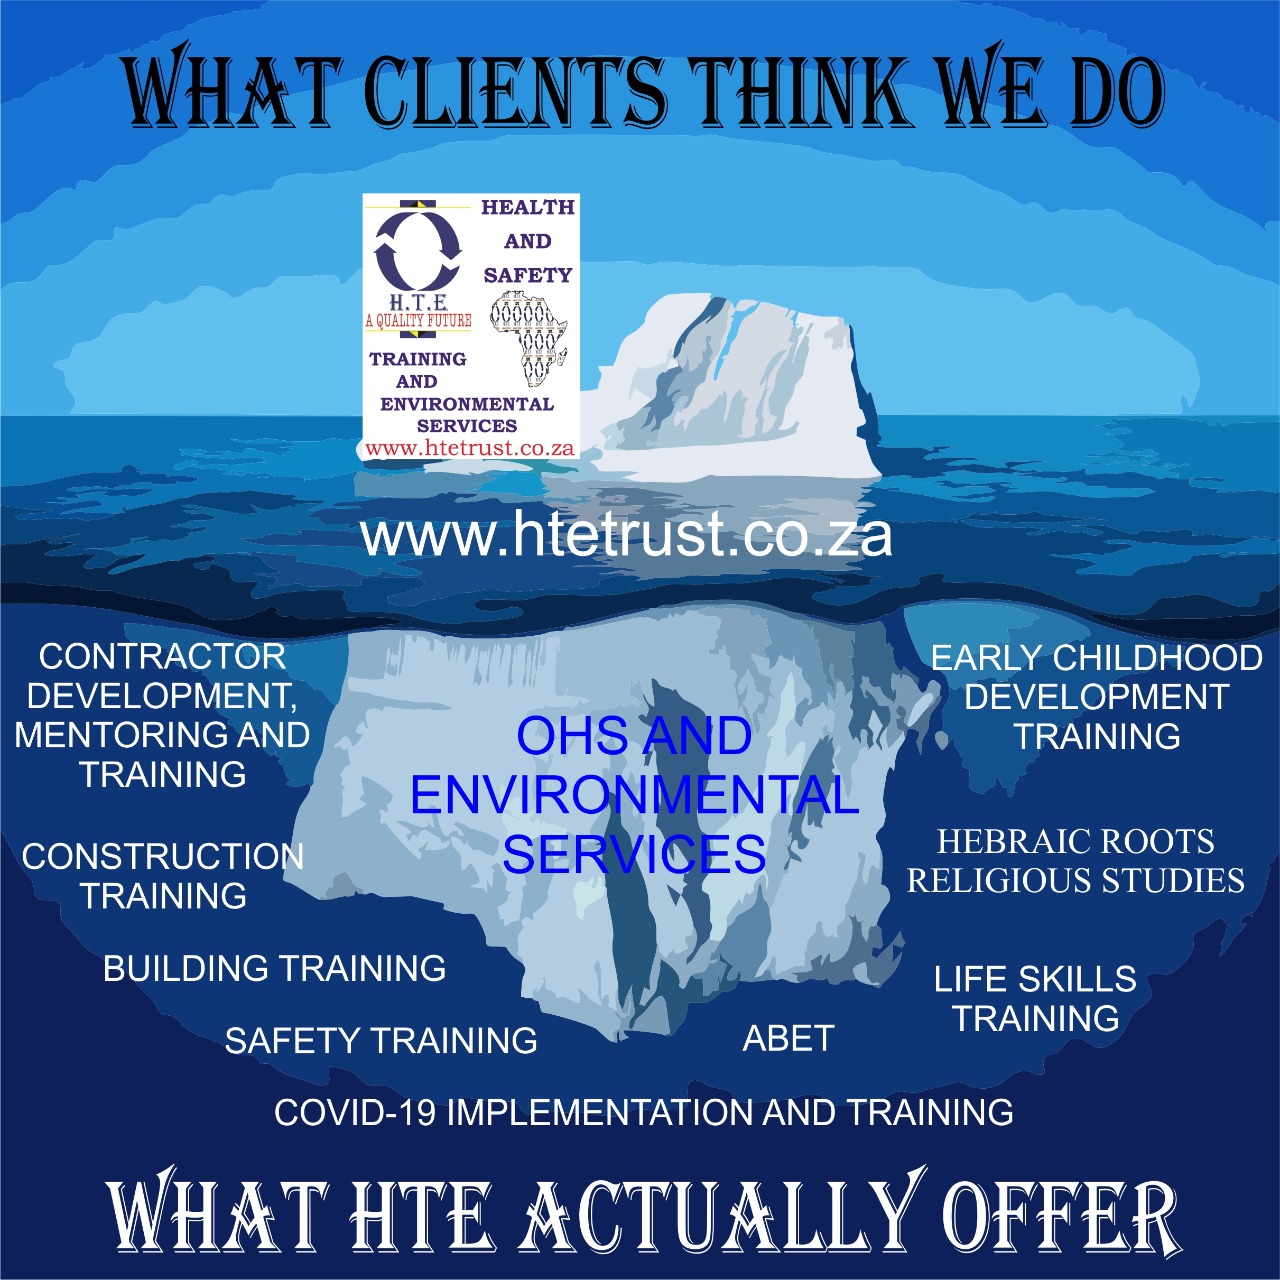 HTE – Health and Safety, Training & Environmental Services